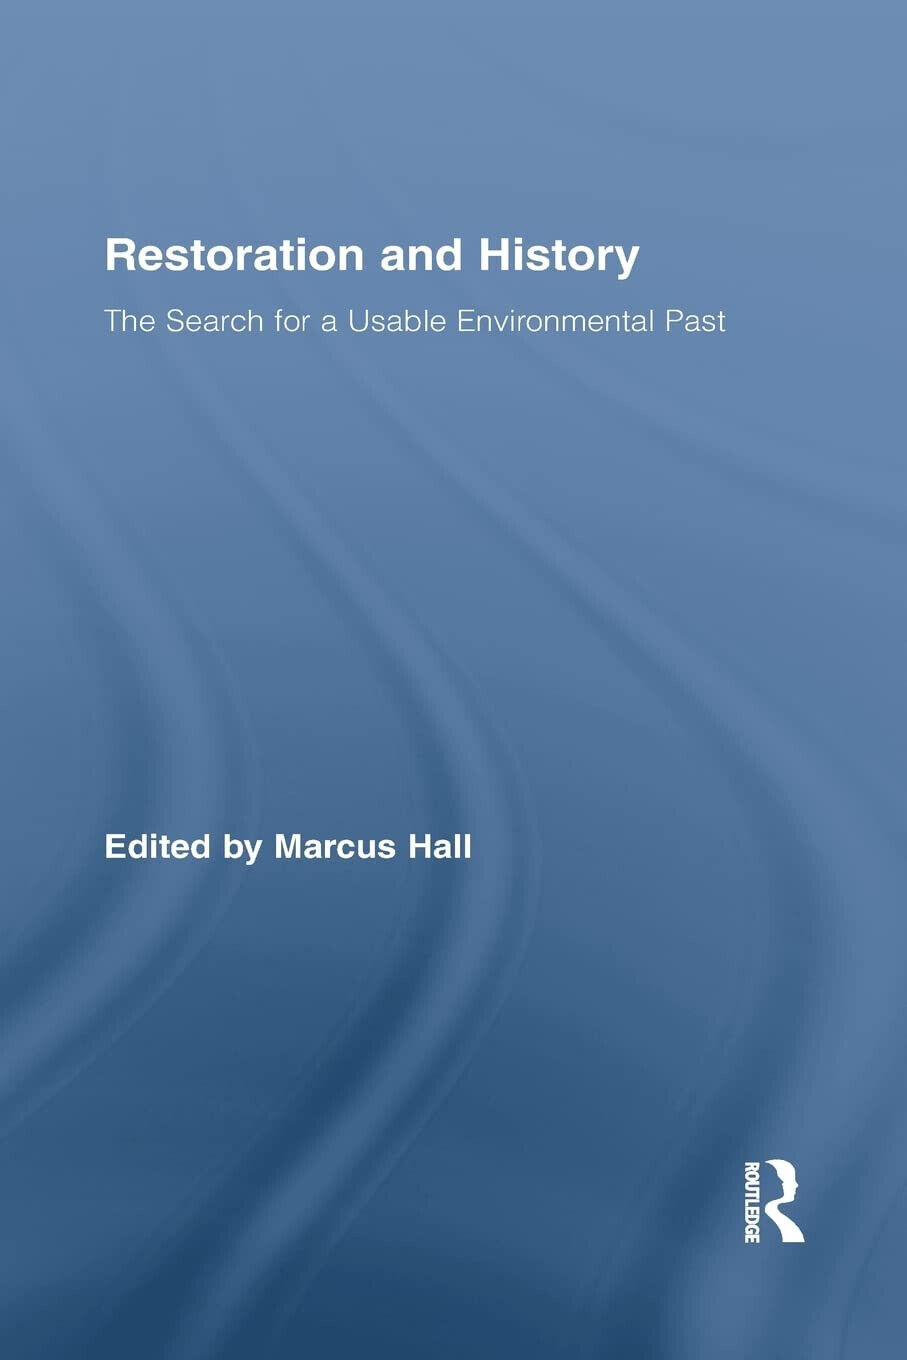 Restoration and History - Marcus Hall - ROUTLEDGE, 2015